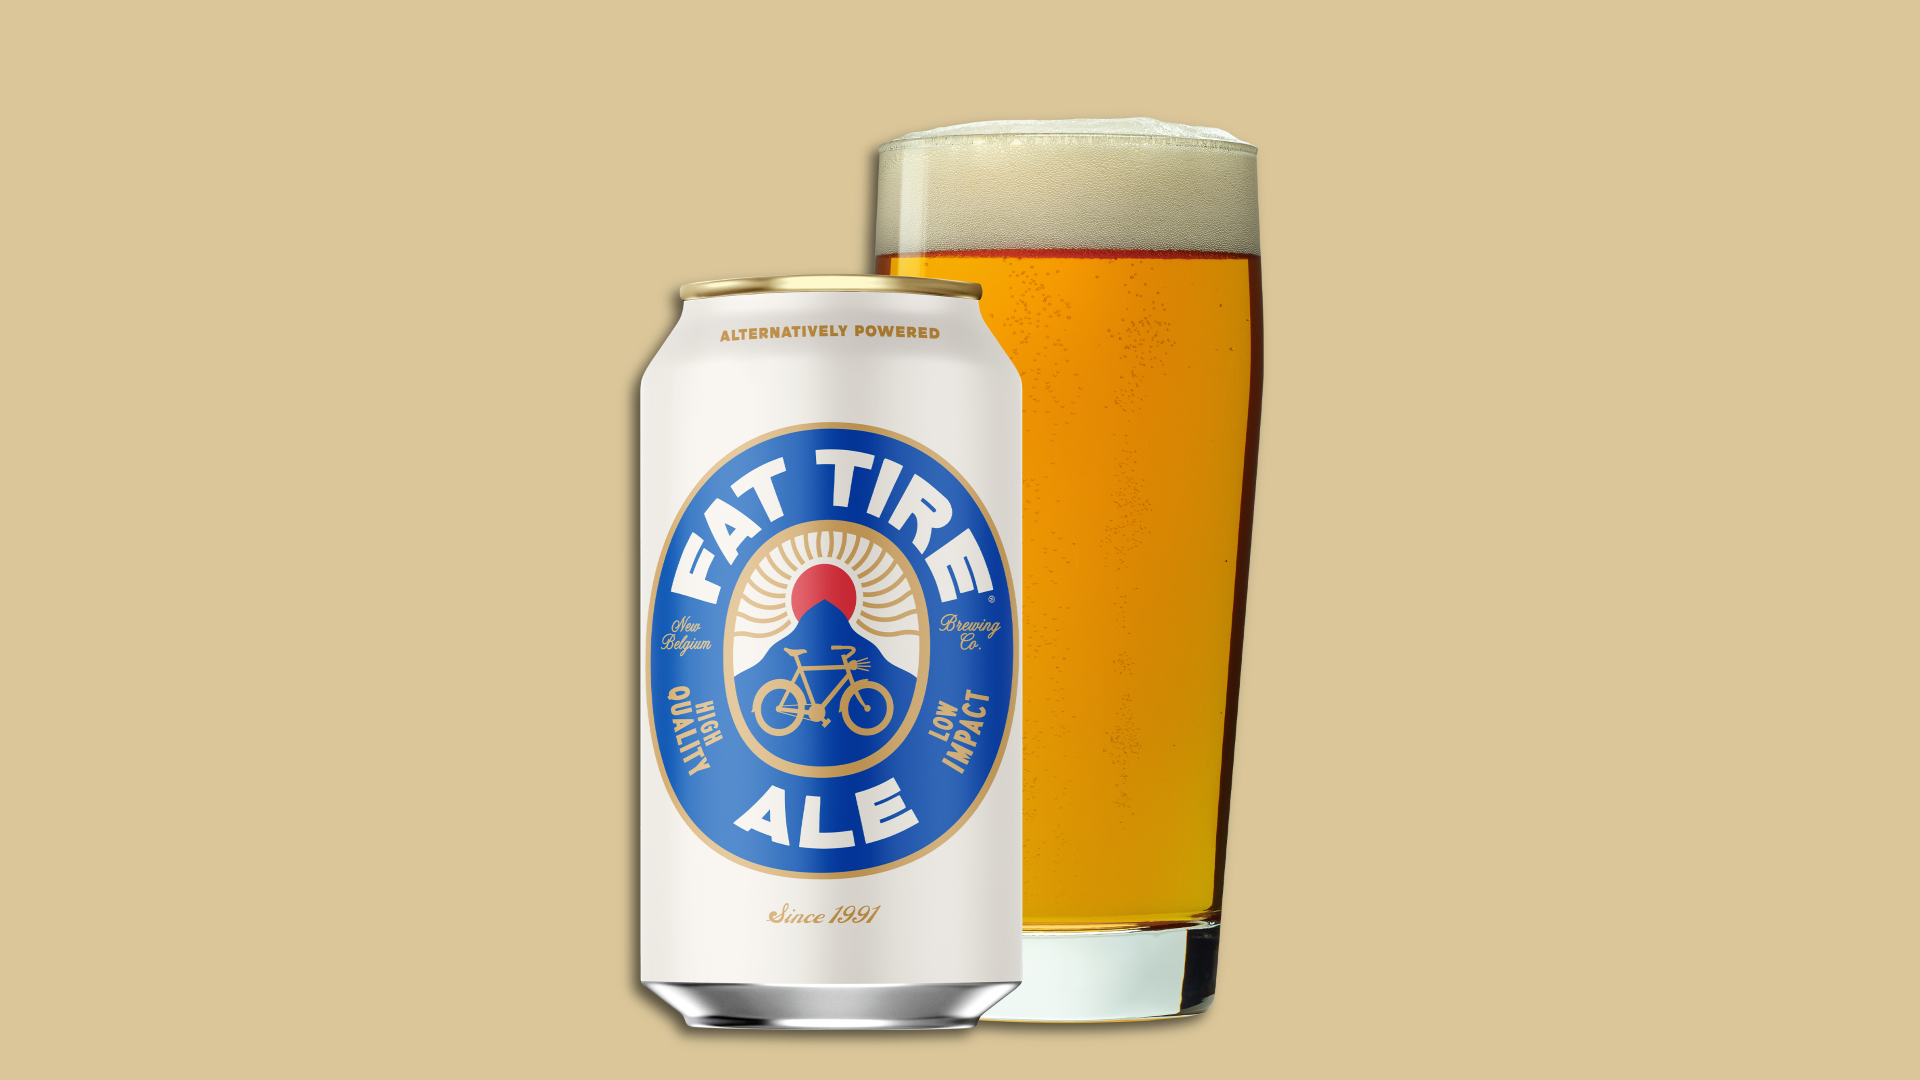 The new Fat Tire packaging.